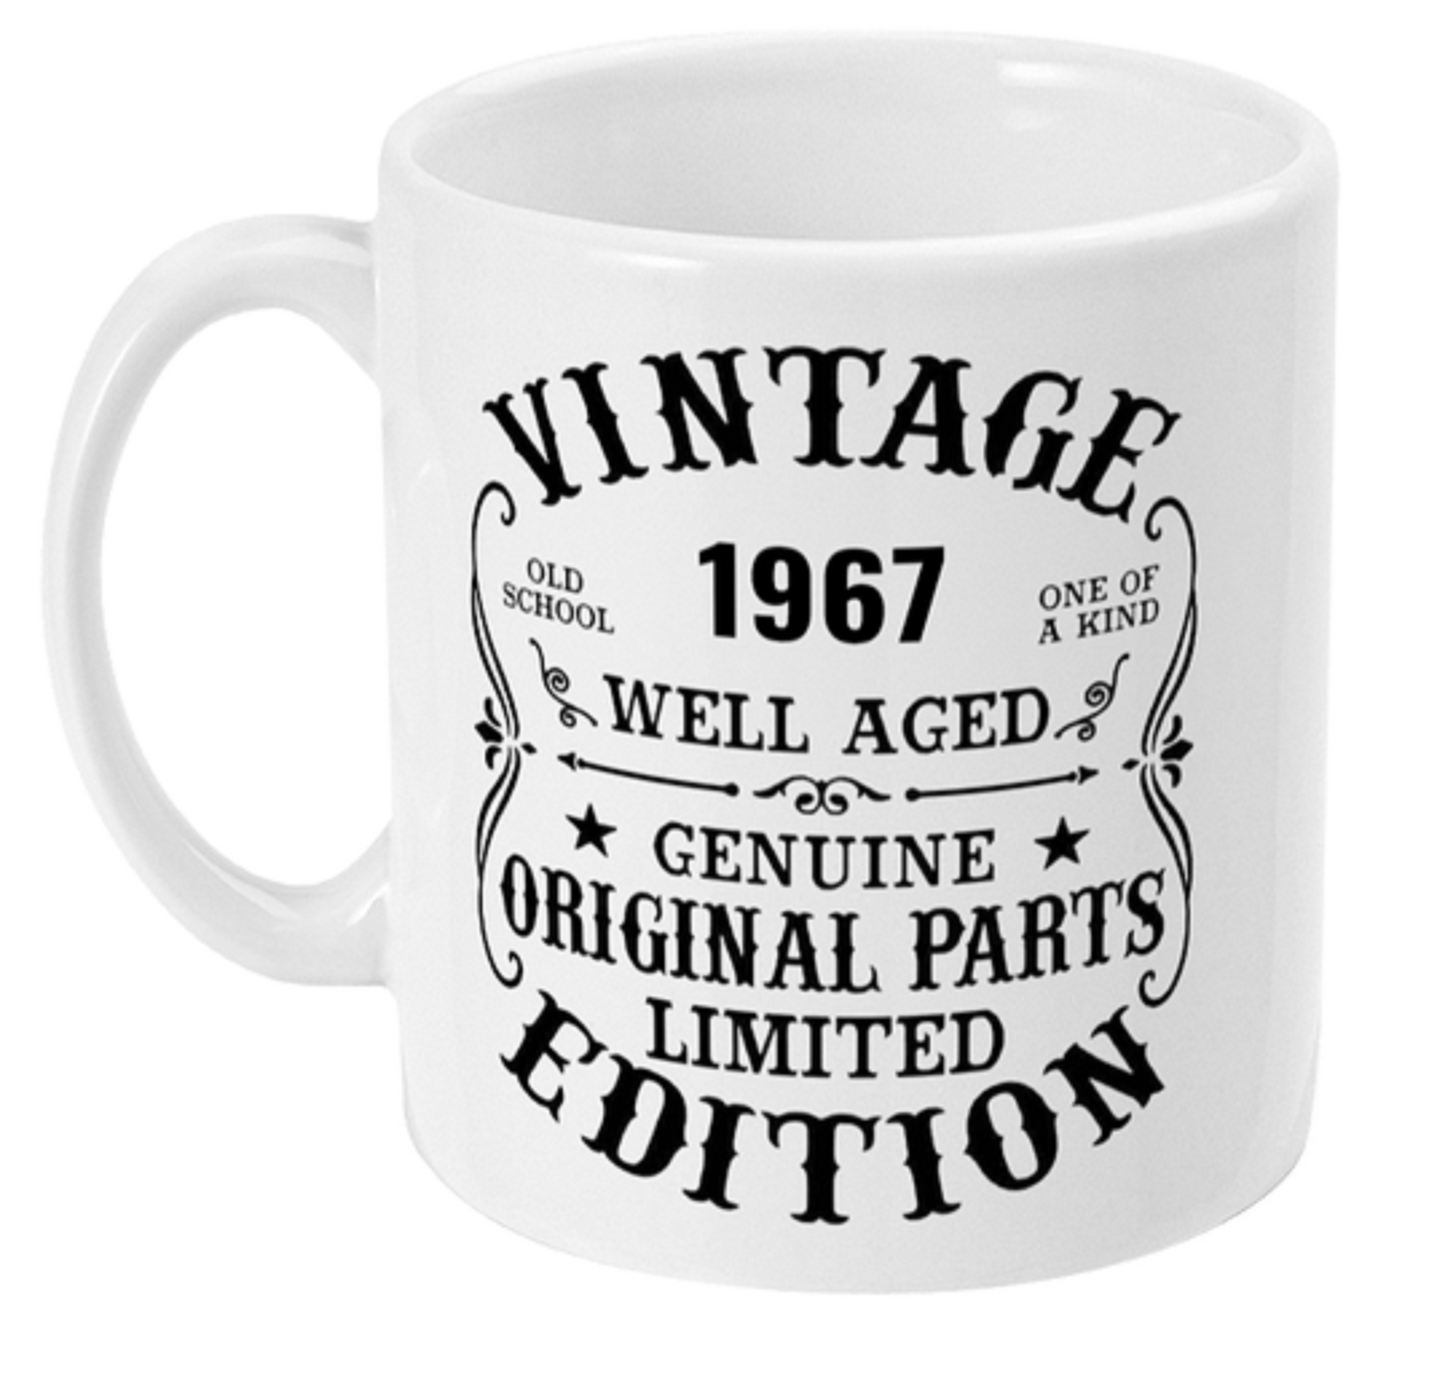  Vintage Edition Coffee Mug Choice of Years by Free Spirit Accessories sold by Free Spirit Accessories